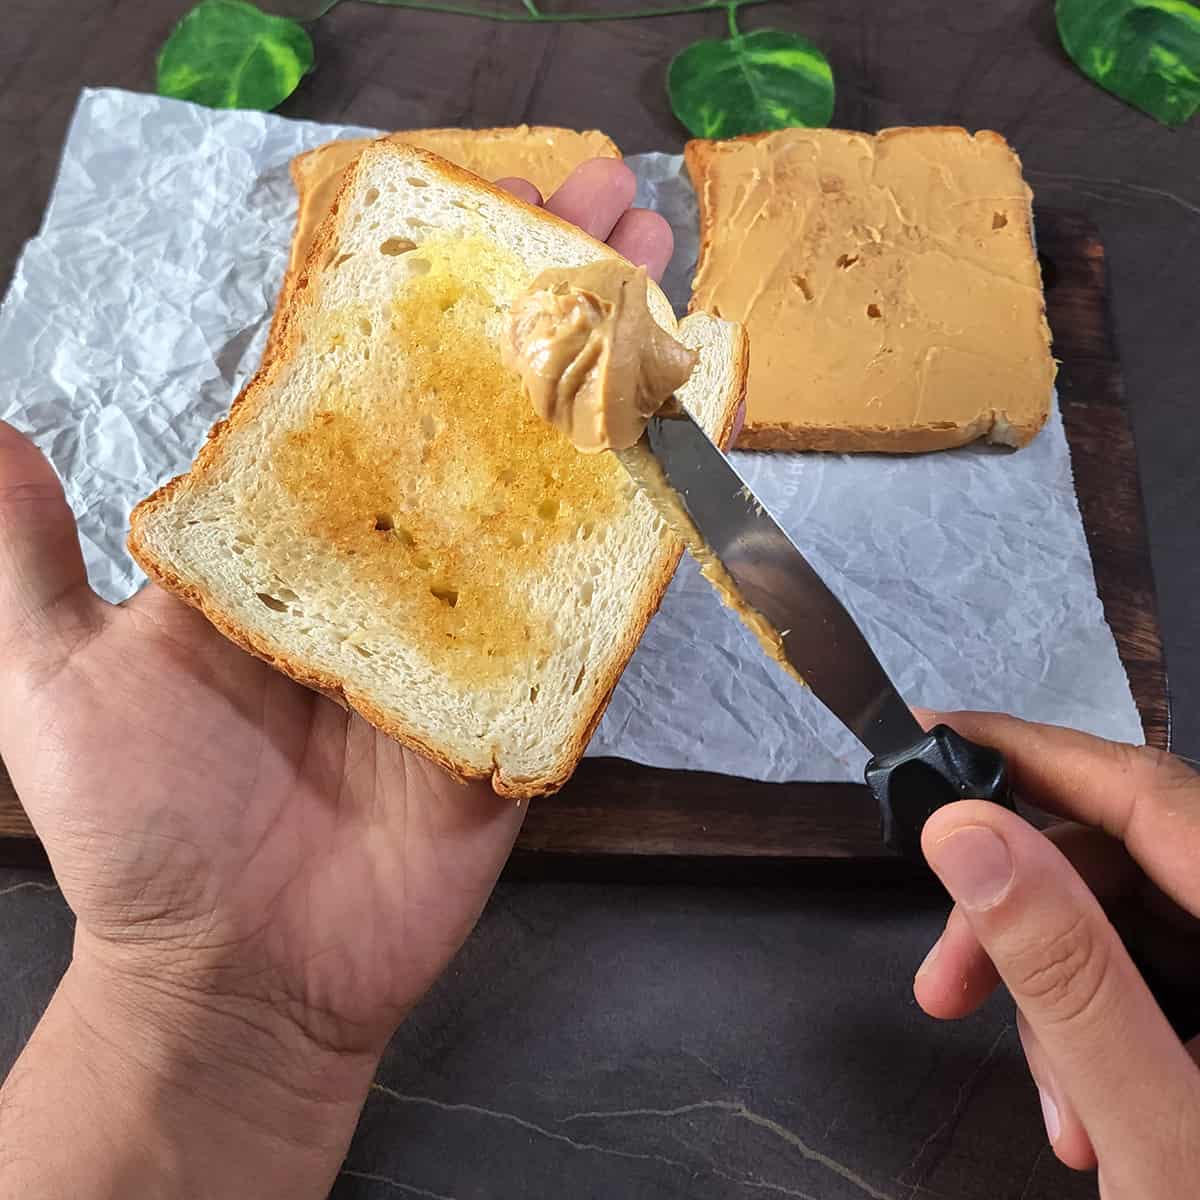 Spread peanut butter on top of toasted bread using a butter knife.